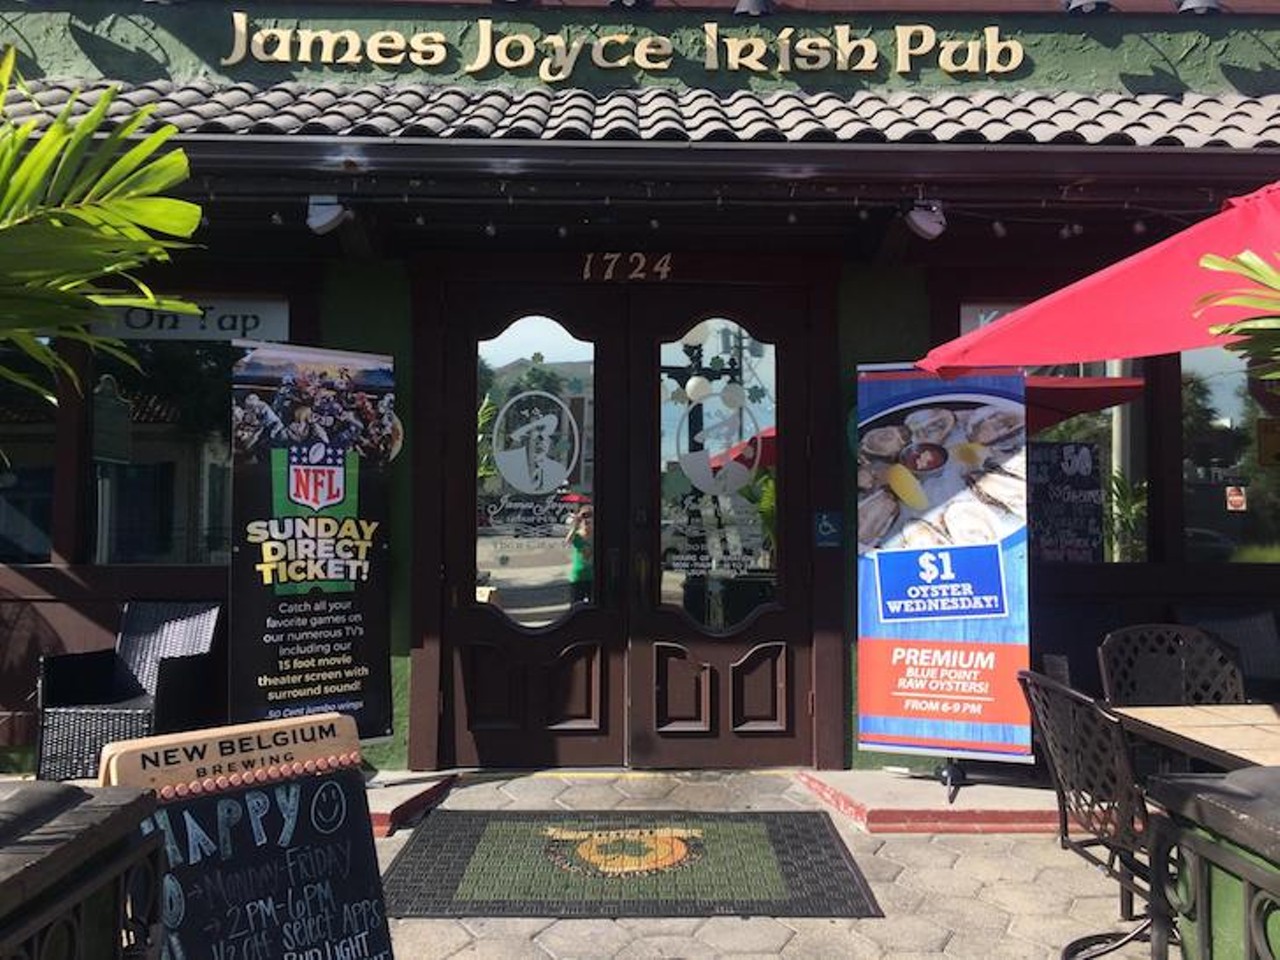 James Joyce Irish Pub  
1724 E 8th Ave., Tampa, 813-247-1896
When everything else is closed in Ybor, James Joyce is open until 3 a.m. seven days a week. Always dim-lighting, and a crazy long beer list, and shot specials. Grab their award-winning Sriracha burger - angus beef burger topped with homemade Sriracha sauce, cucumbers, pickled ginger and Asian slaw.
Photo via James Joyce Irish Pub/Facebook